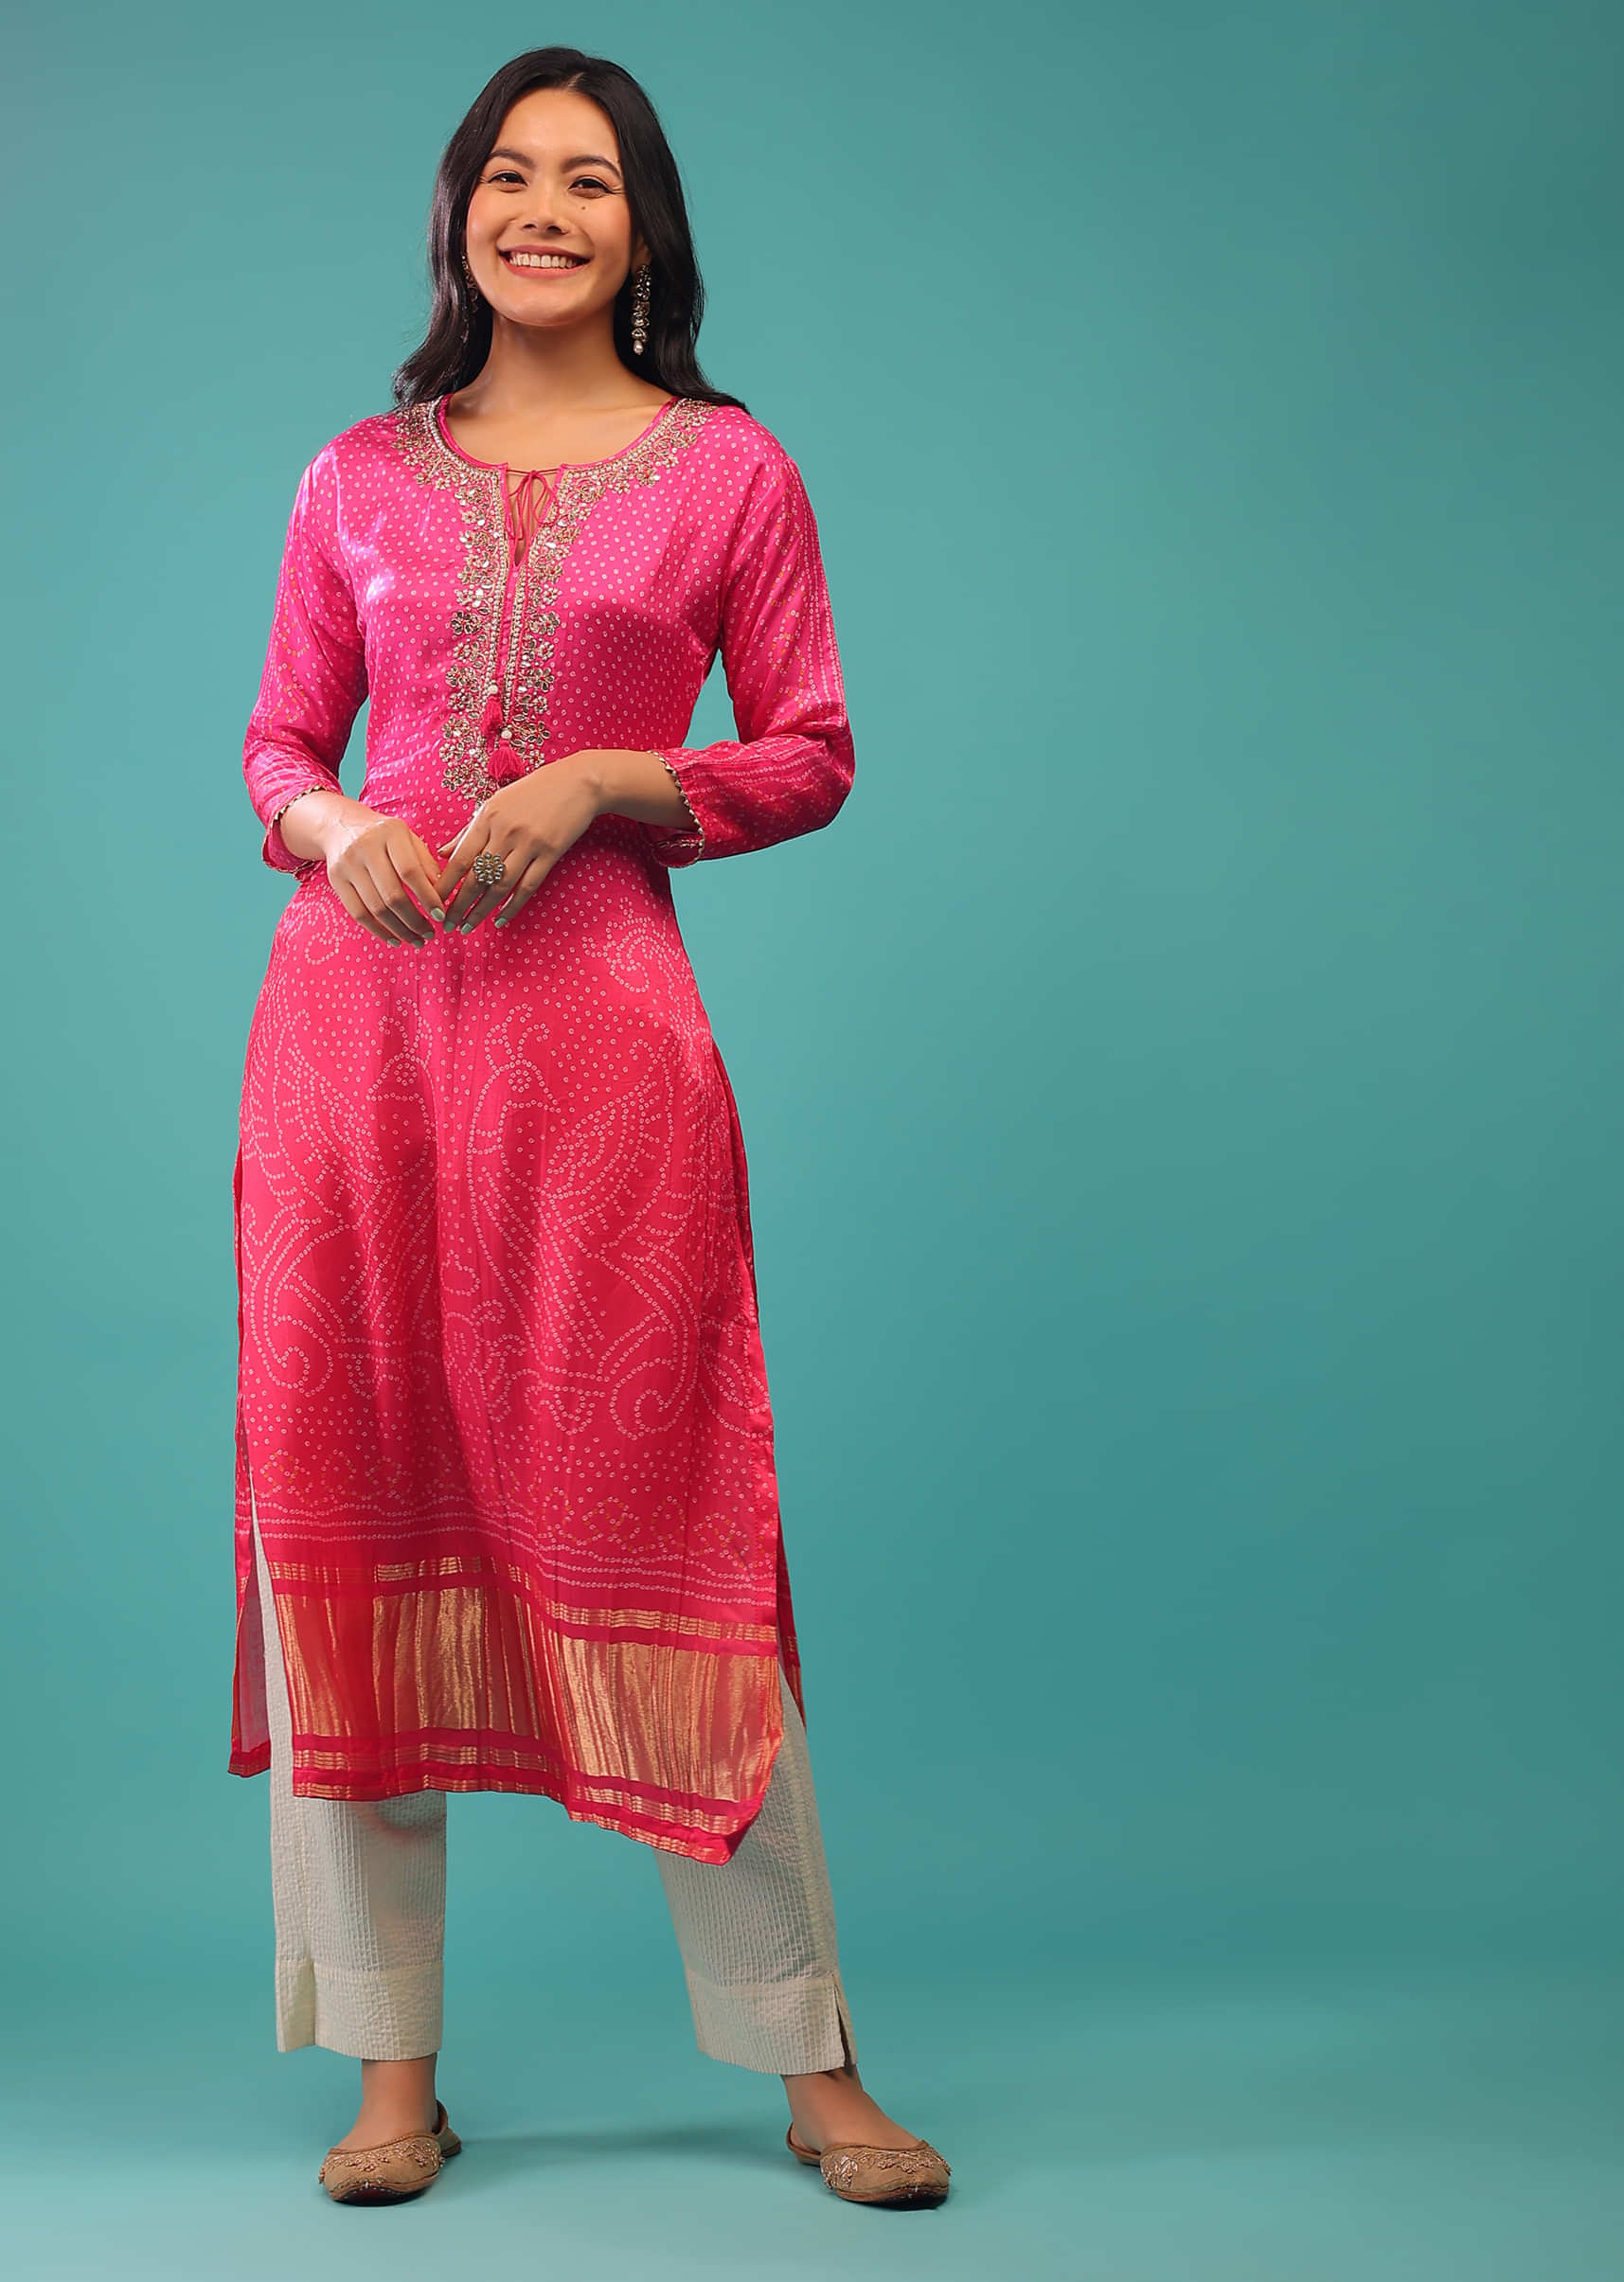 Hot Pink Kurti With Brocade Border In Gold Color